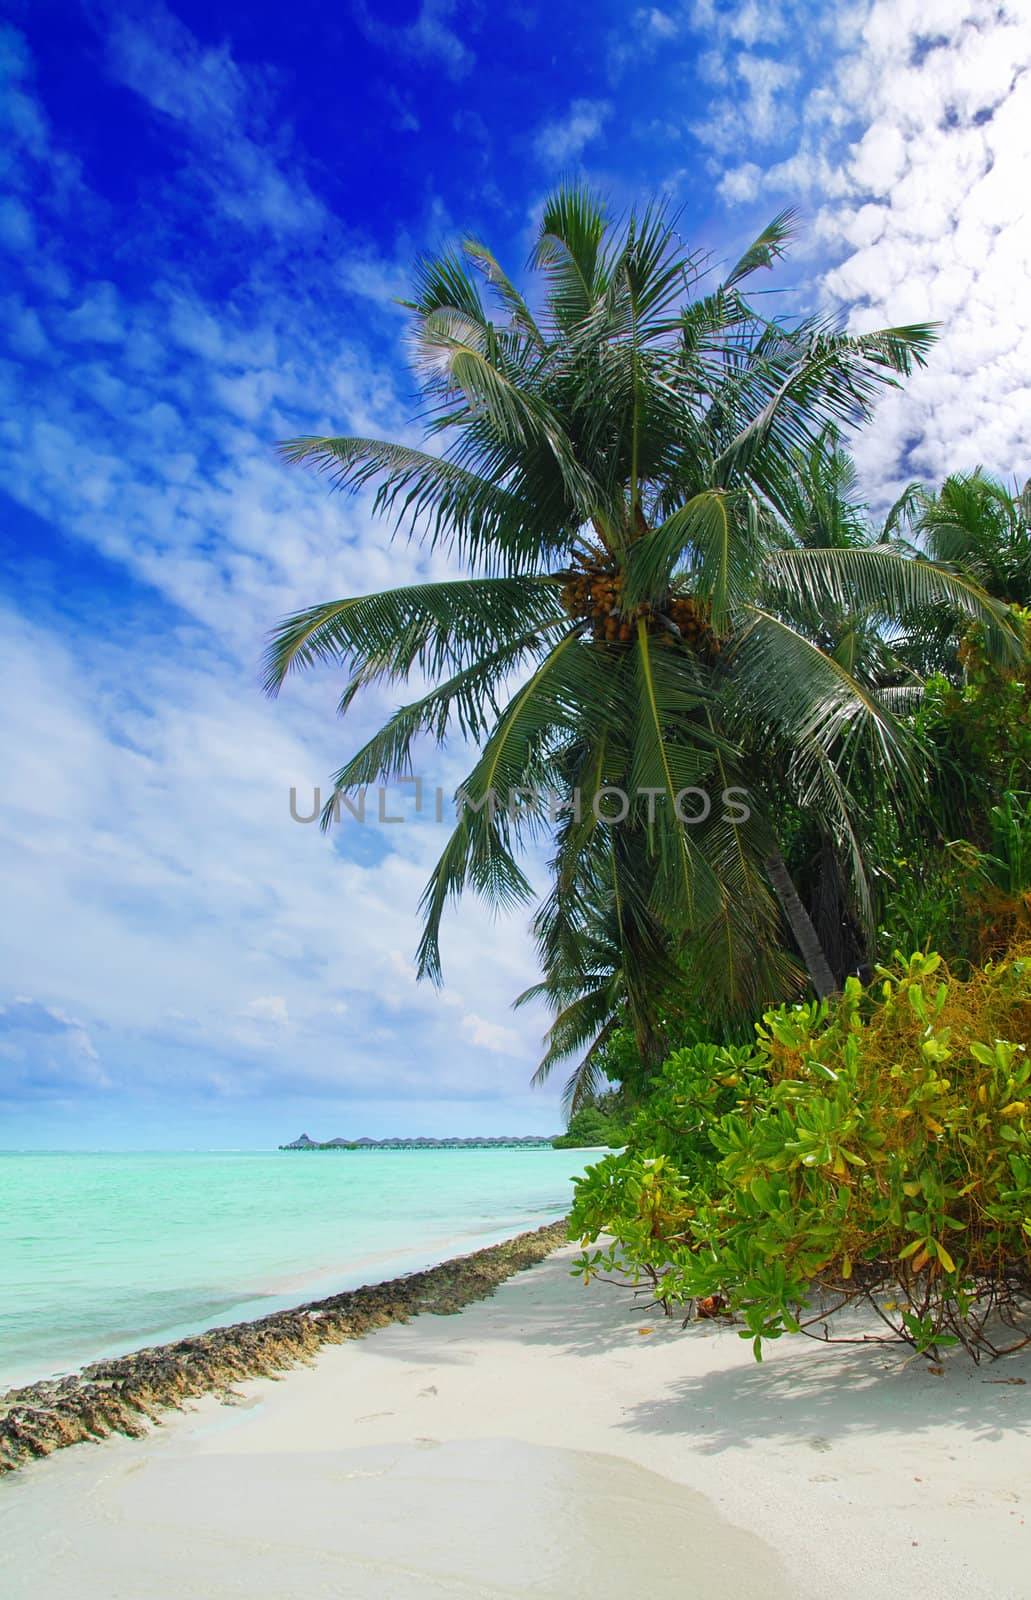 Beutiful tropical beach in the Maldives with a coconut palms hanging over the sea